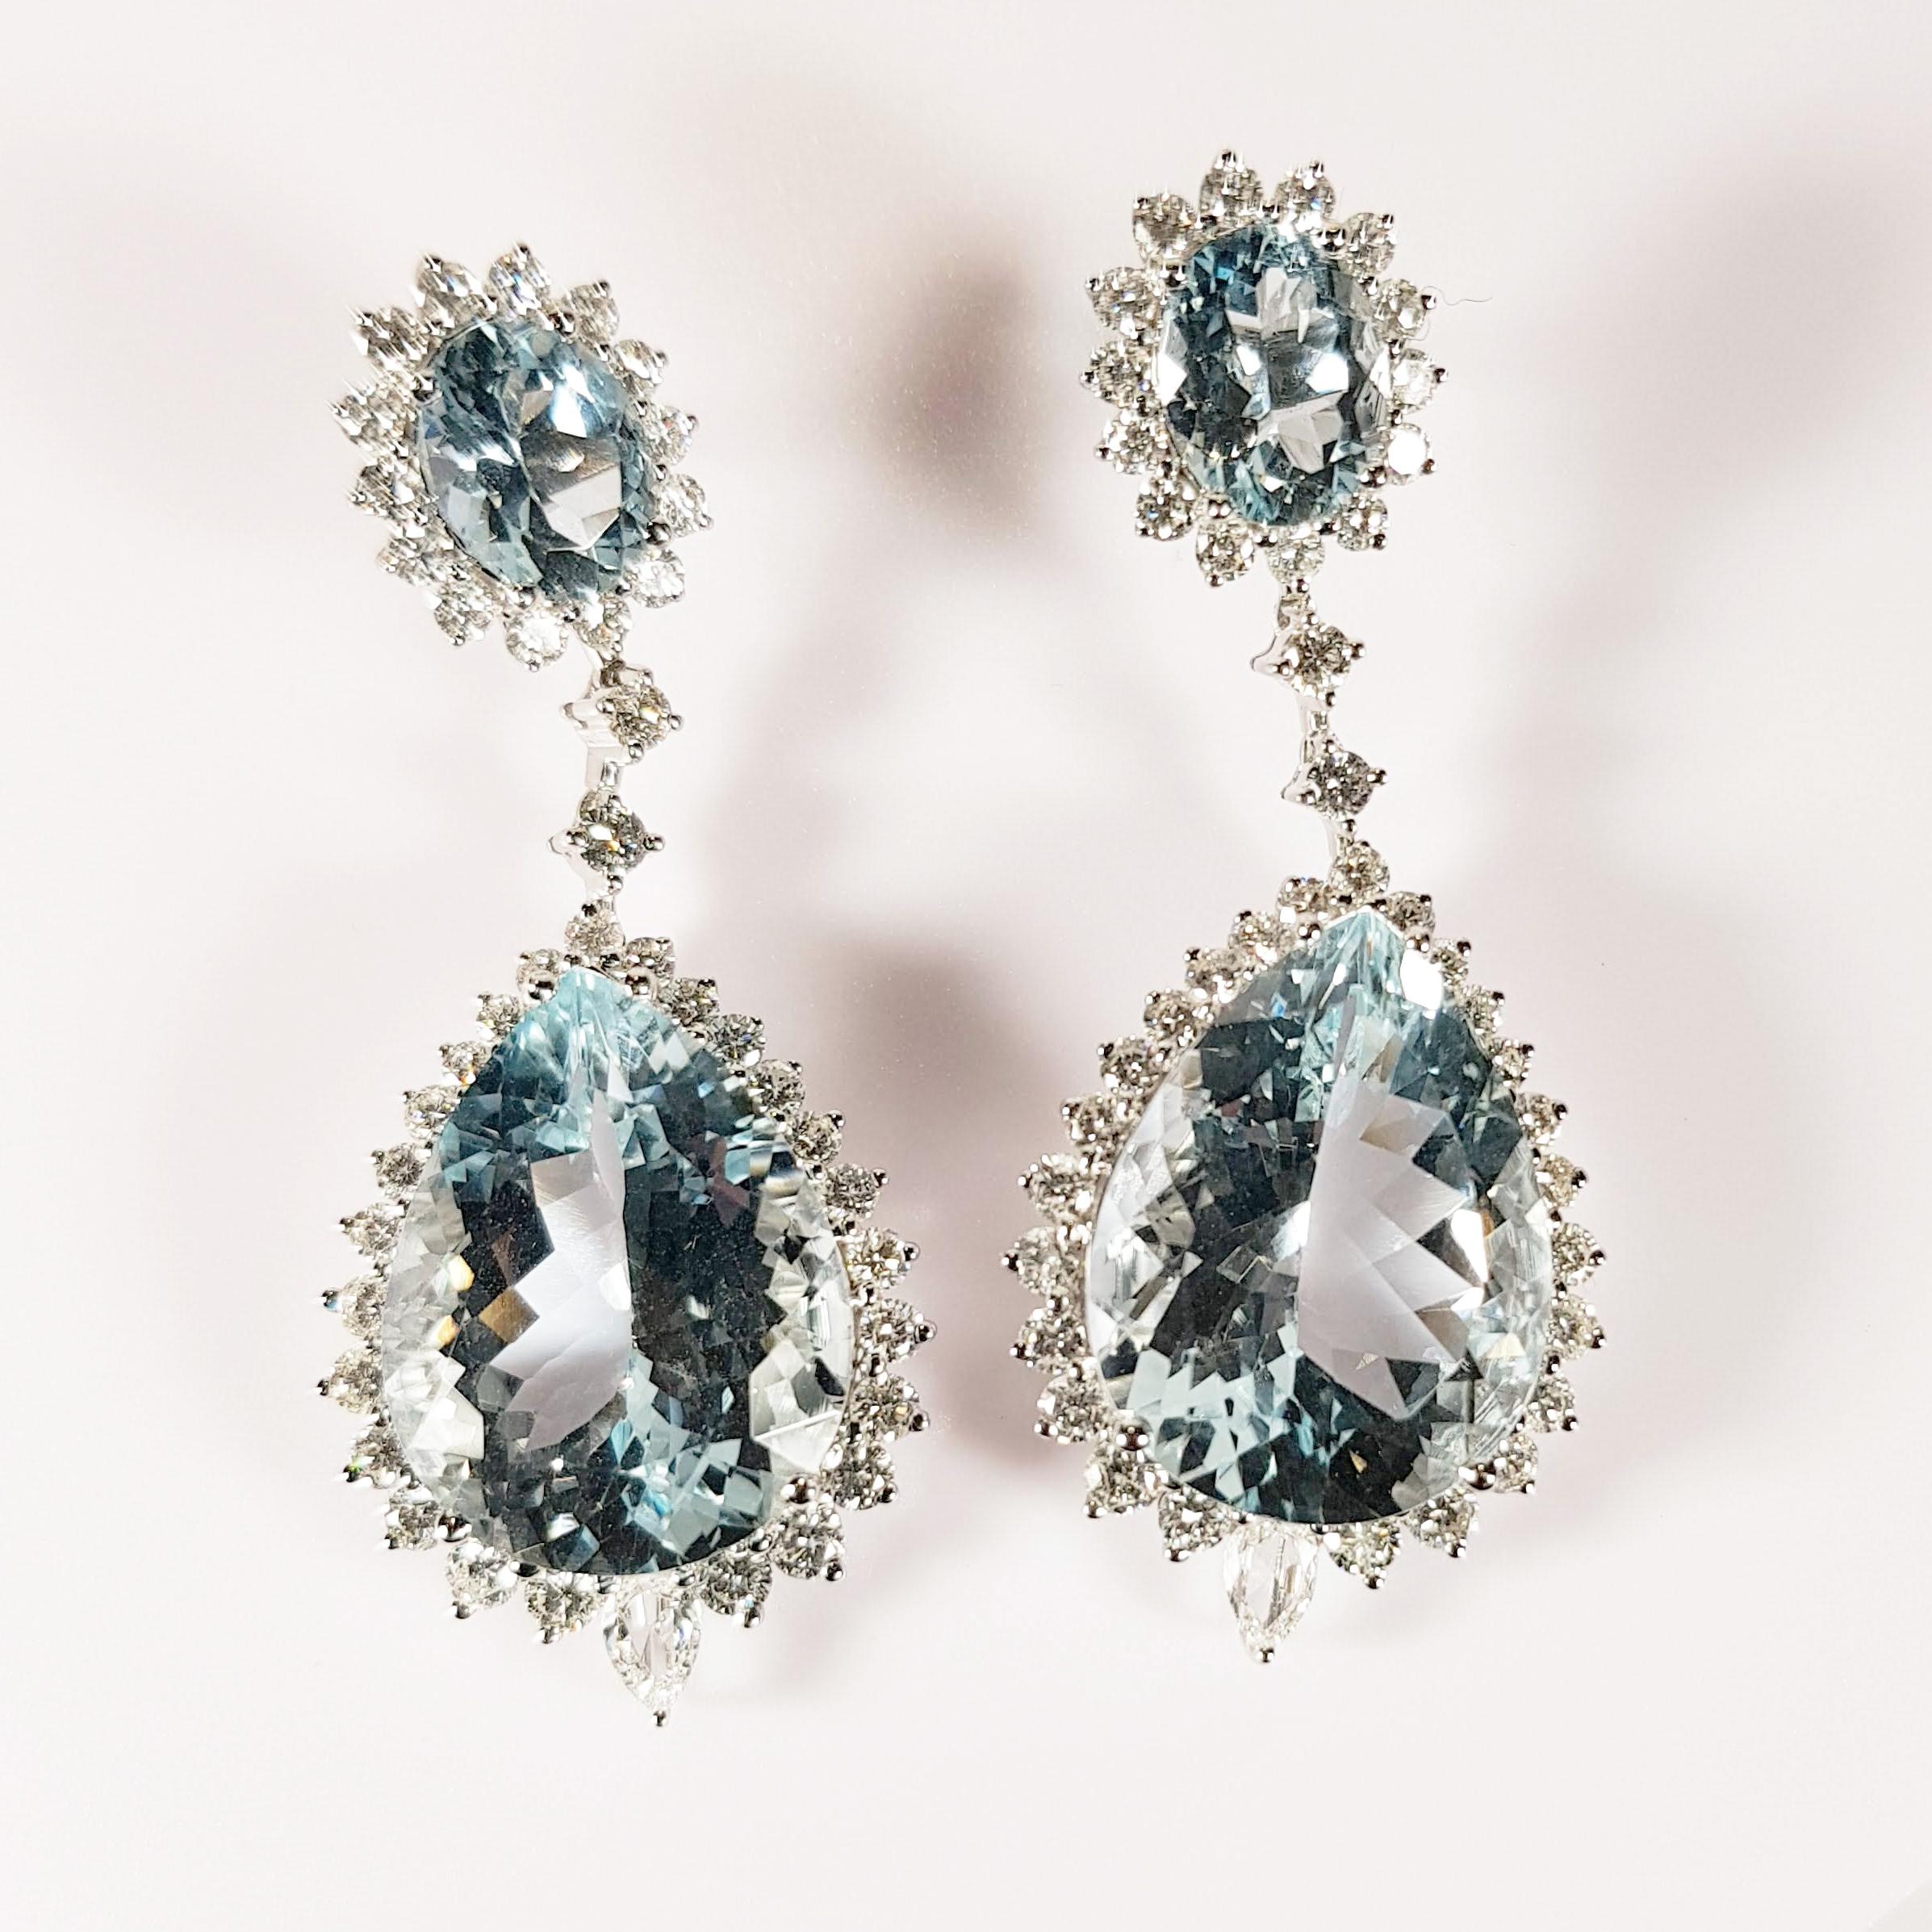 Irama Pradera is a Young designer from Spain that searches always for the best gems and combines classic with contemporary mounting and styles. 

◘ Weight 19.25 gr.
◘ Gold Weight 12.41 gr.
◘ Aquamarine 4 units aprox 30.67ct.
◘ Diamonds 84 units